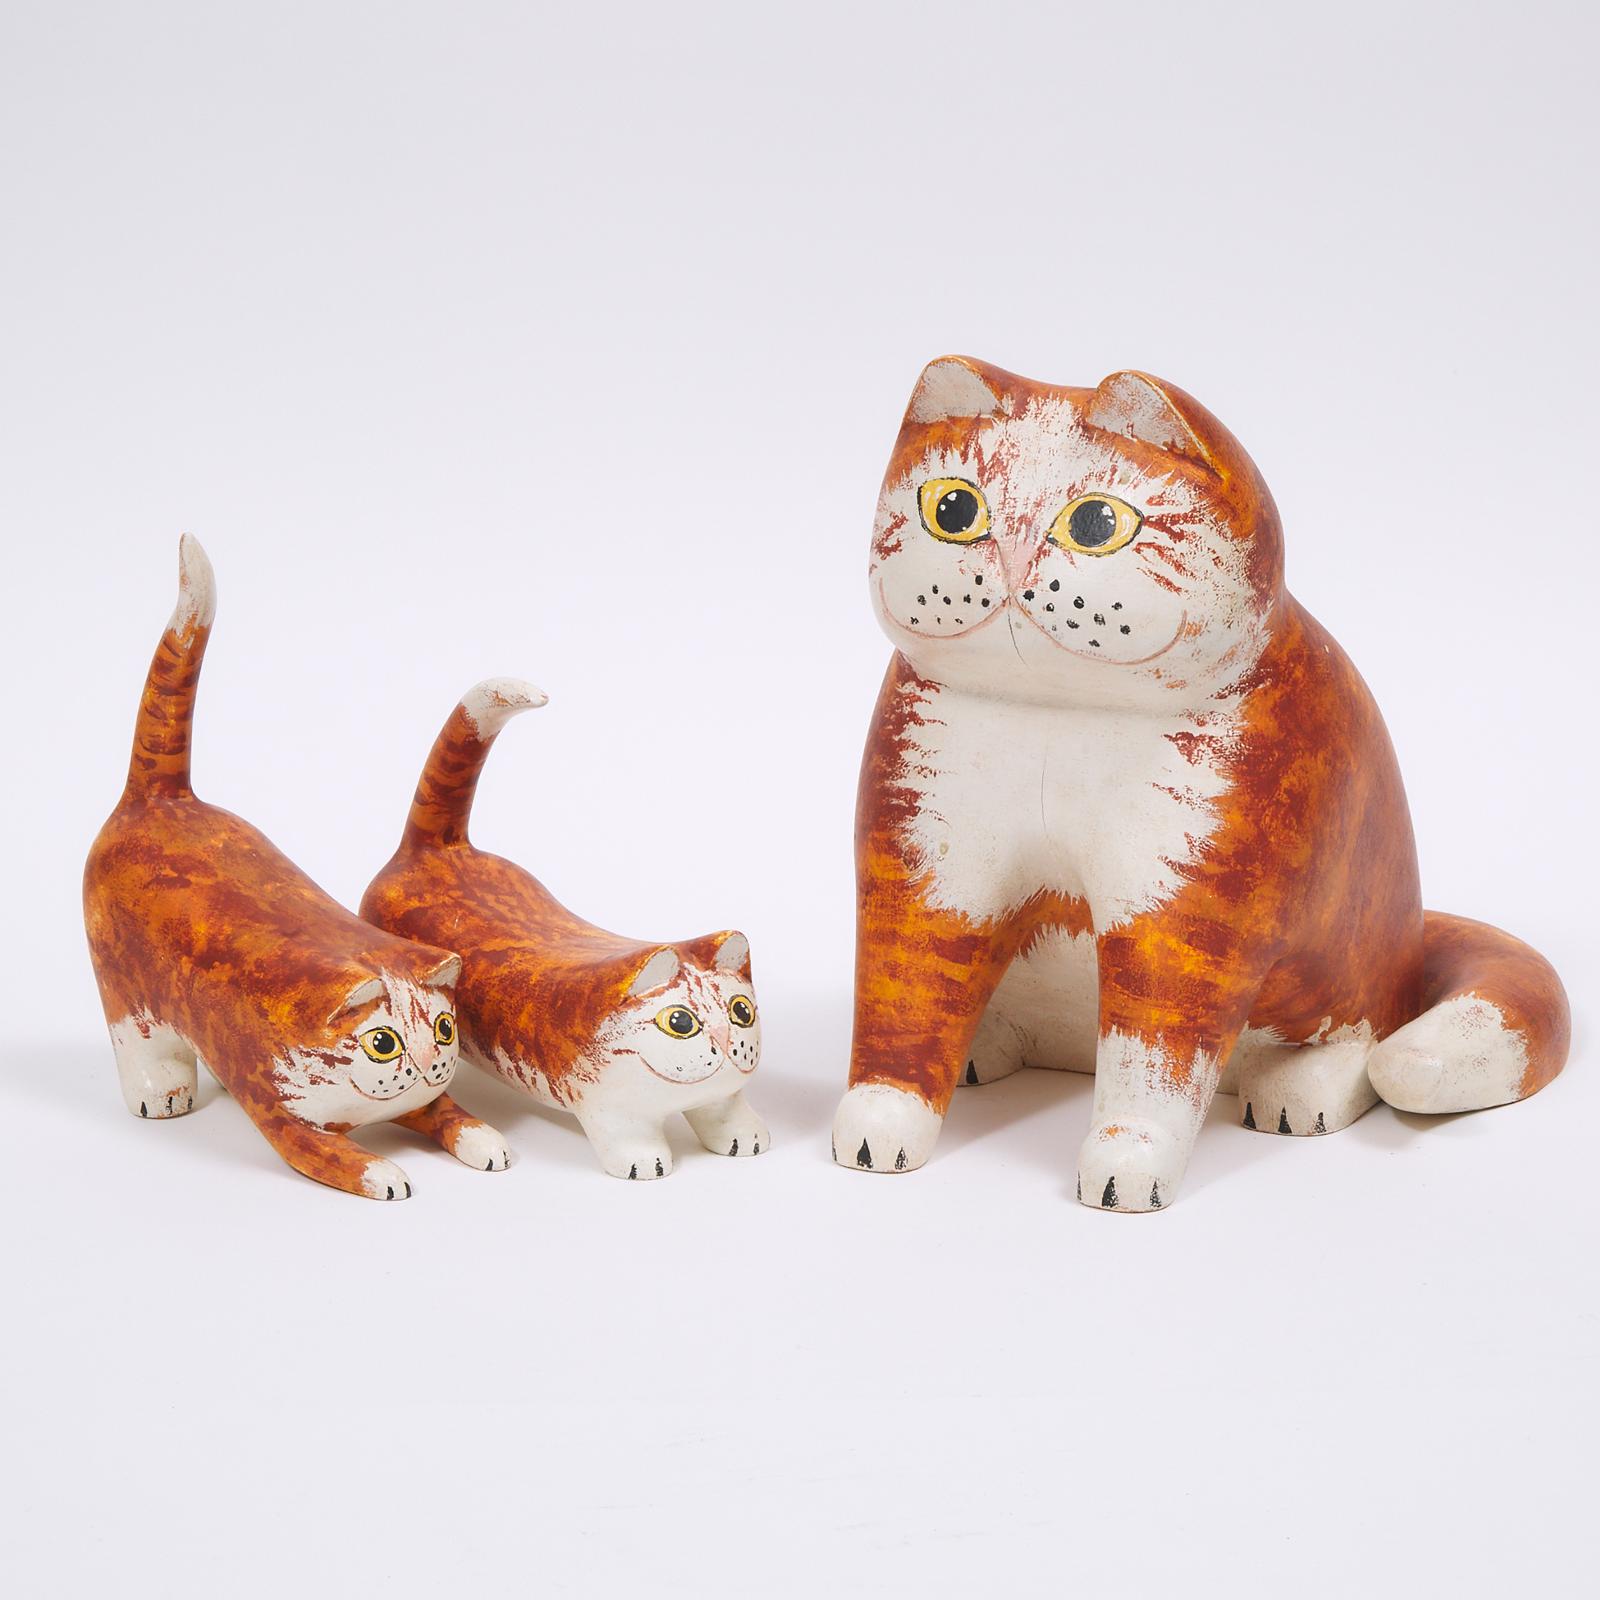 Robert Wylie - Orange Tabby Cat With Two Kittens